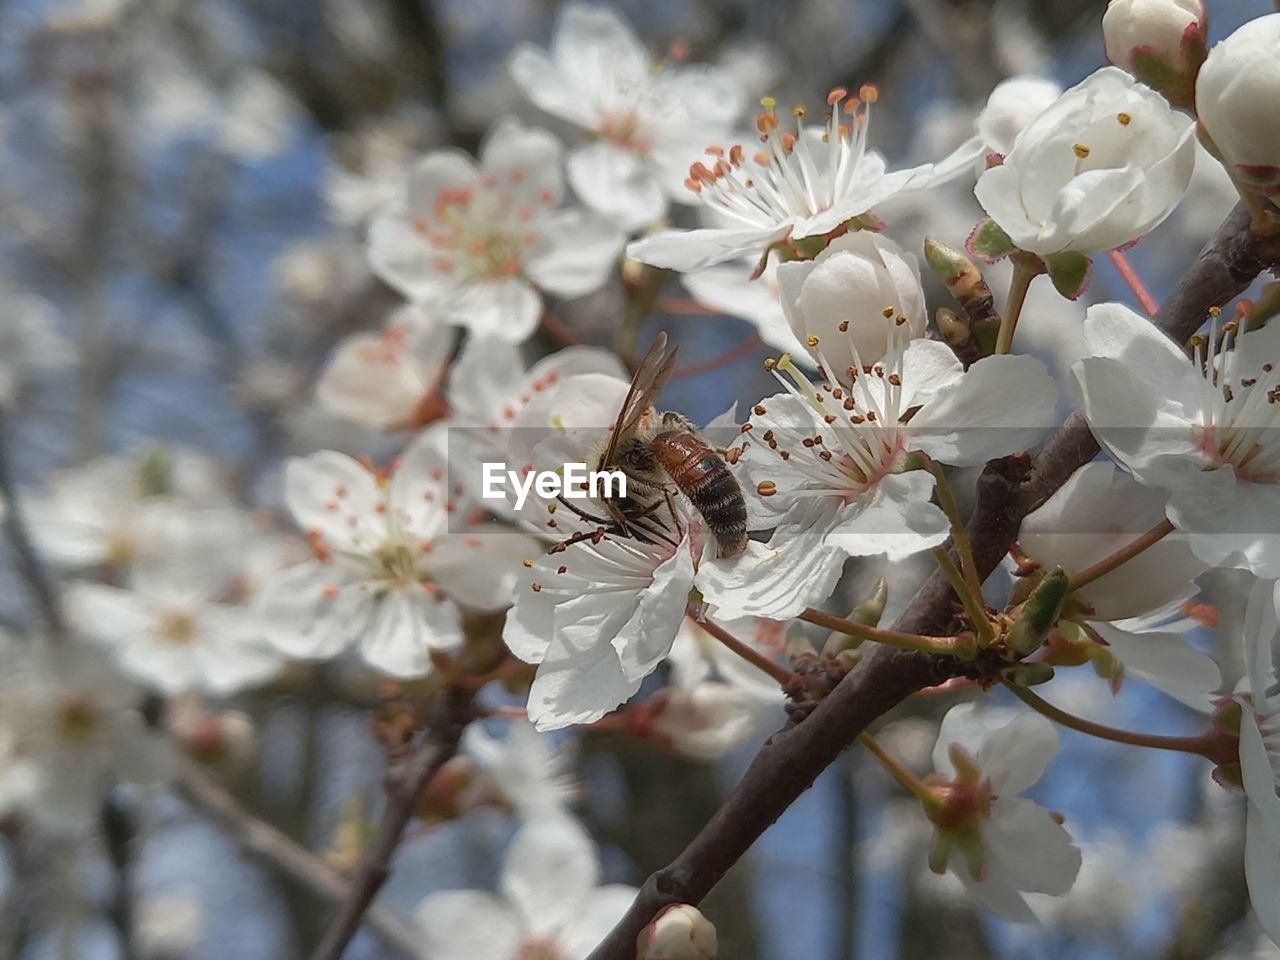 plant, flower, flowering plant, fragility, blossom, beauty in nature, freshness, growth, springtime, tree, branch, spring, white, close-up, nature, produce, cherry blossom, food, flower head, pollen, no people, prunus spinosa, focus on foreground, petal, inflorescence, day, almond tree, fruit, twig, botany, outdoors, fruit tree, stamen, selective focus, cherry tree, food and drink